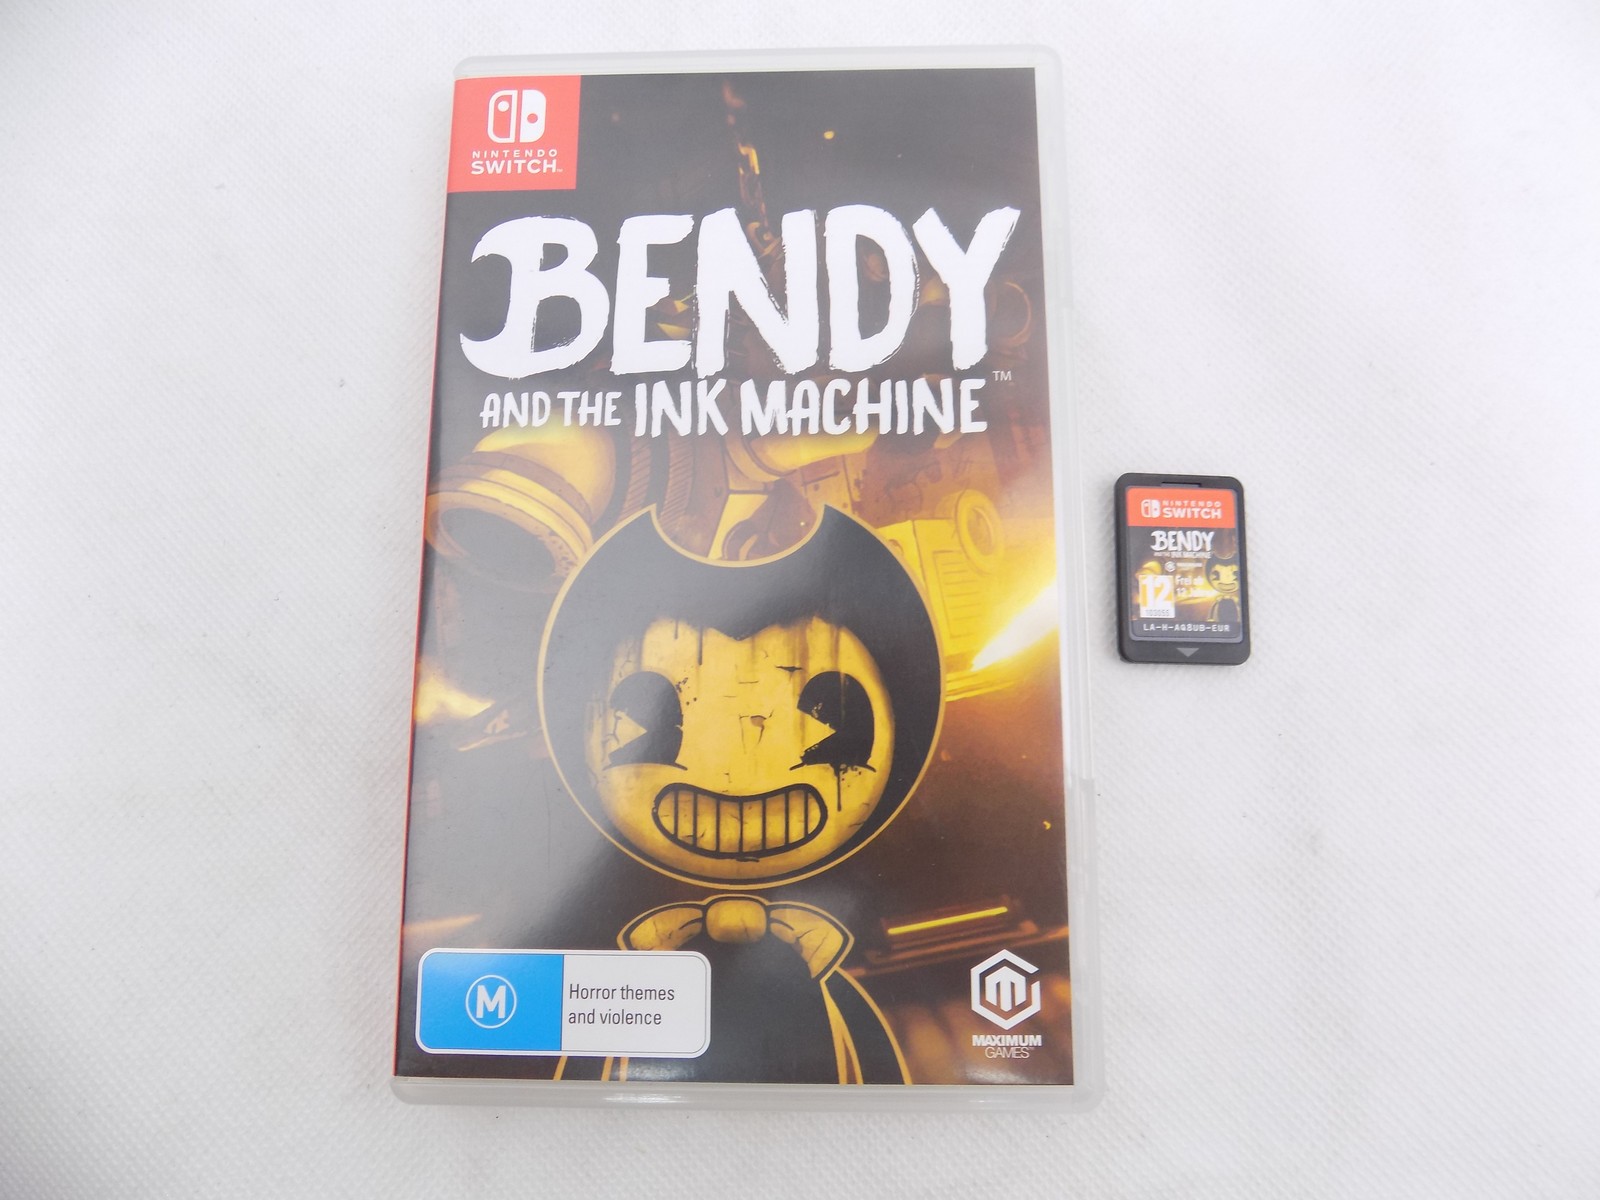 Bendy and the Ink Machine - Nintendo Switch